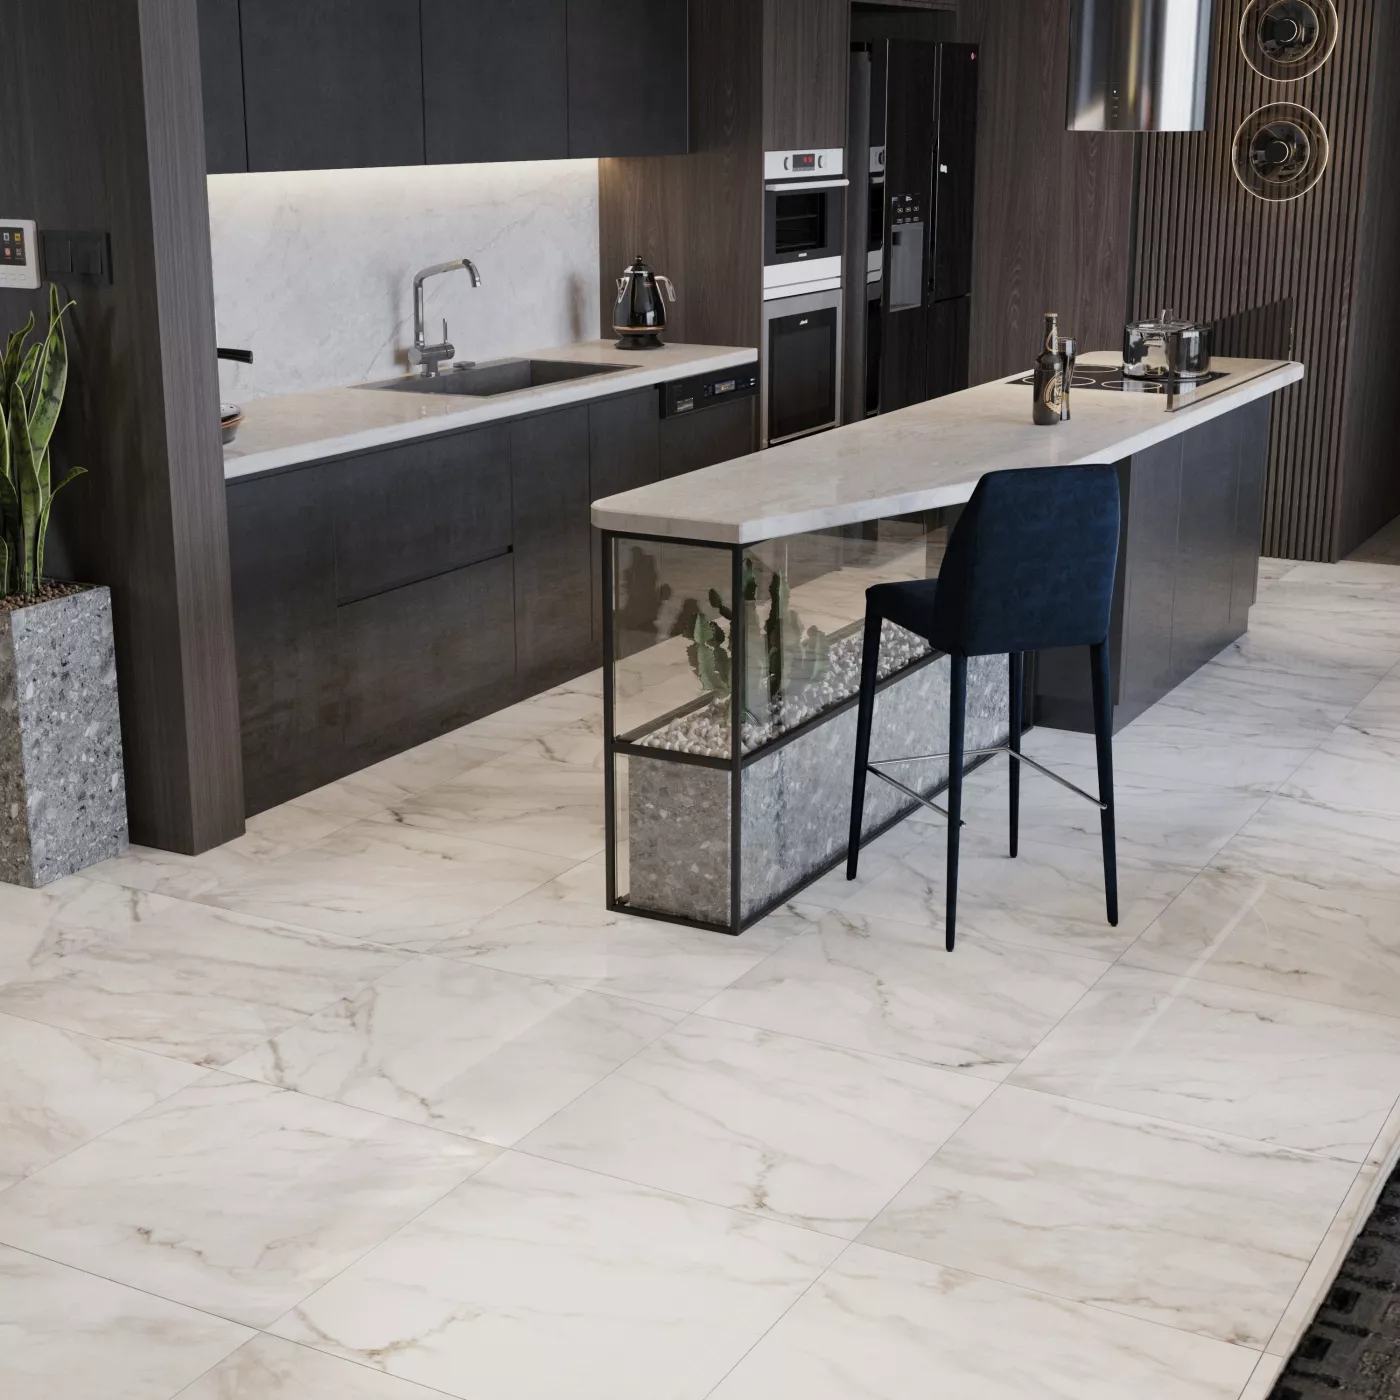 Calacatta Gold Polished Rectified Porcelain